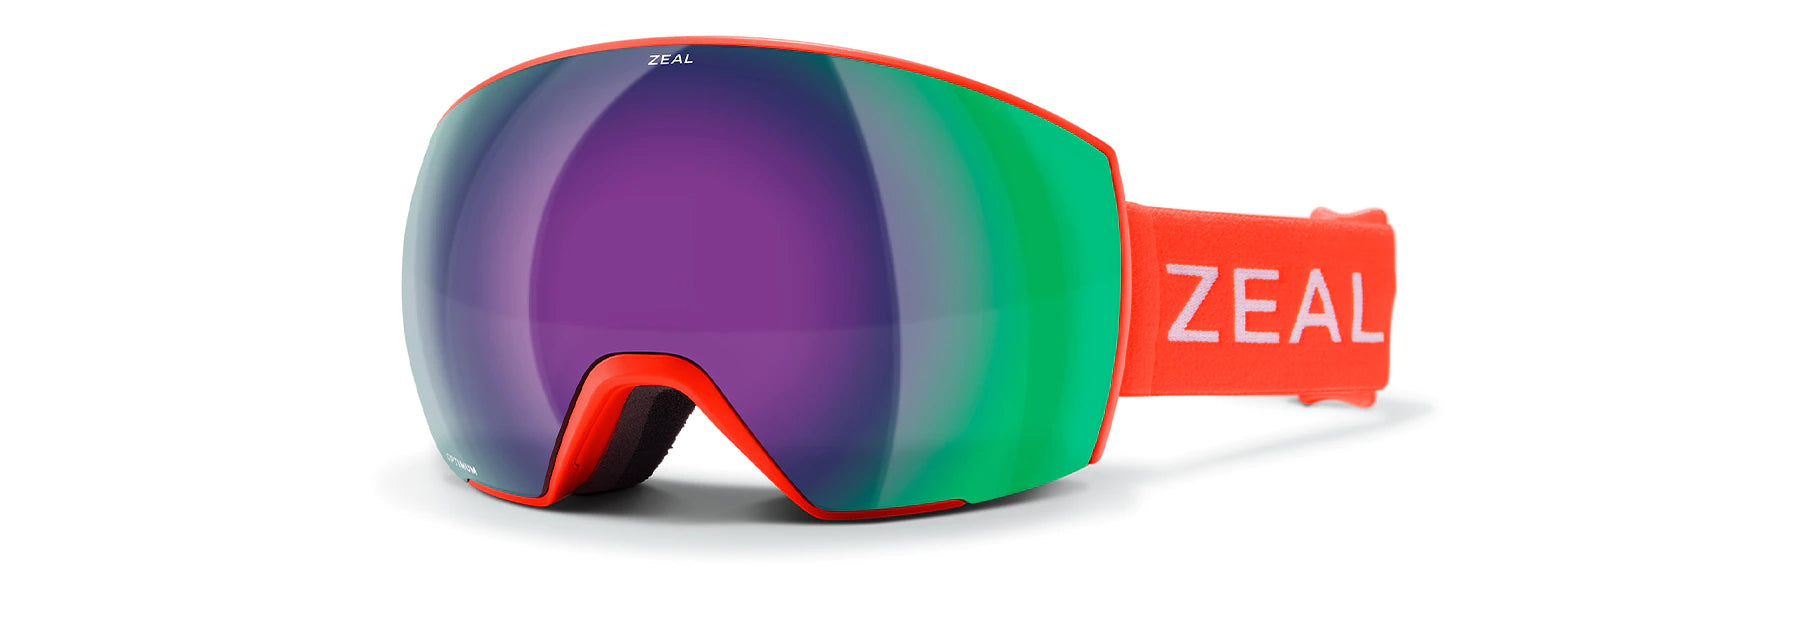 Zeal- Hangfire Observation Deck Technology Ski & Snowboard Goggles coral Strap